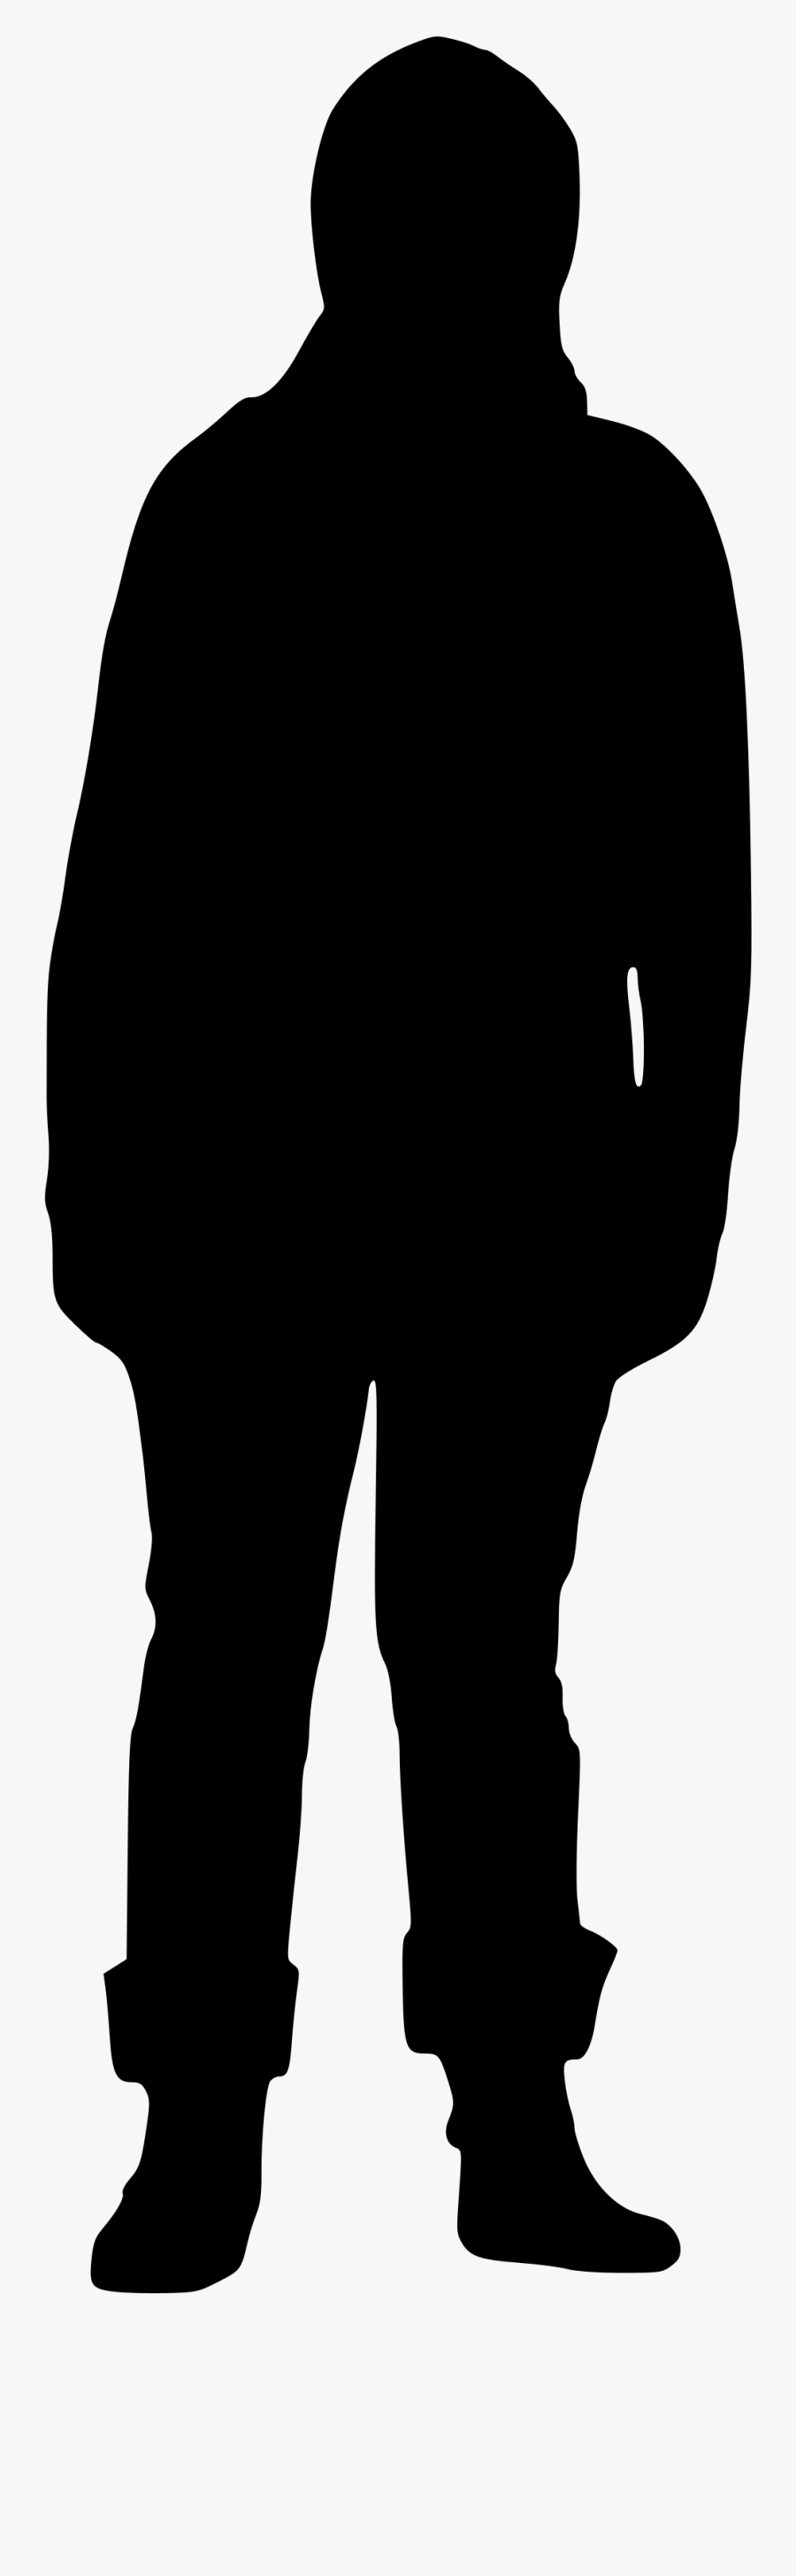 Hoodie Silhouette Person Photography - Man In Hoodie Silhouette, Transparent Clipart